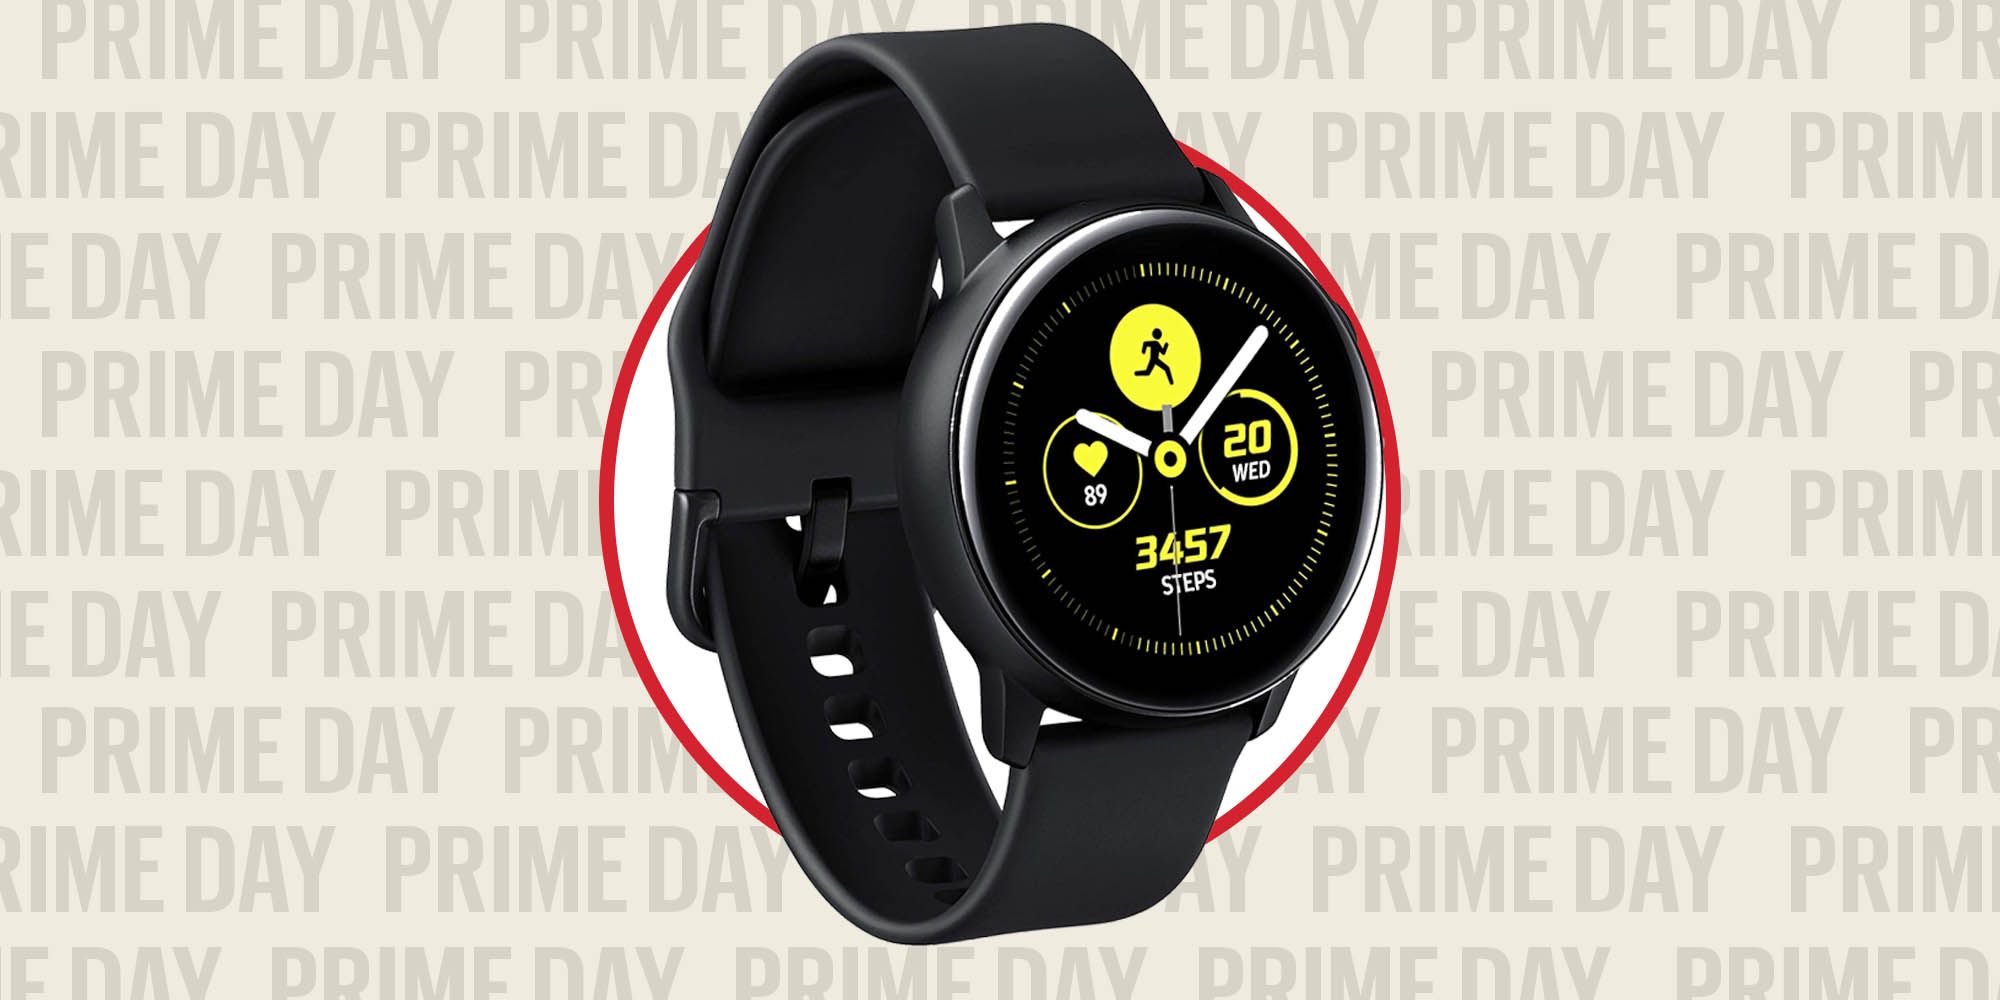 Amazon Prime Day: Smartwatch and 